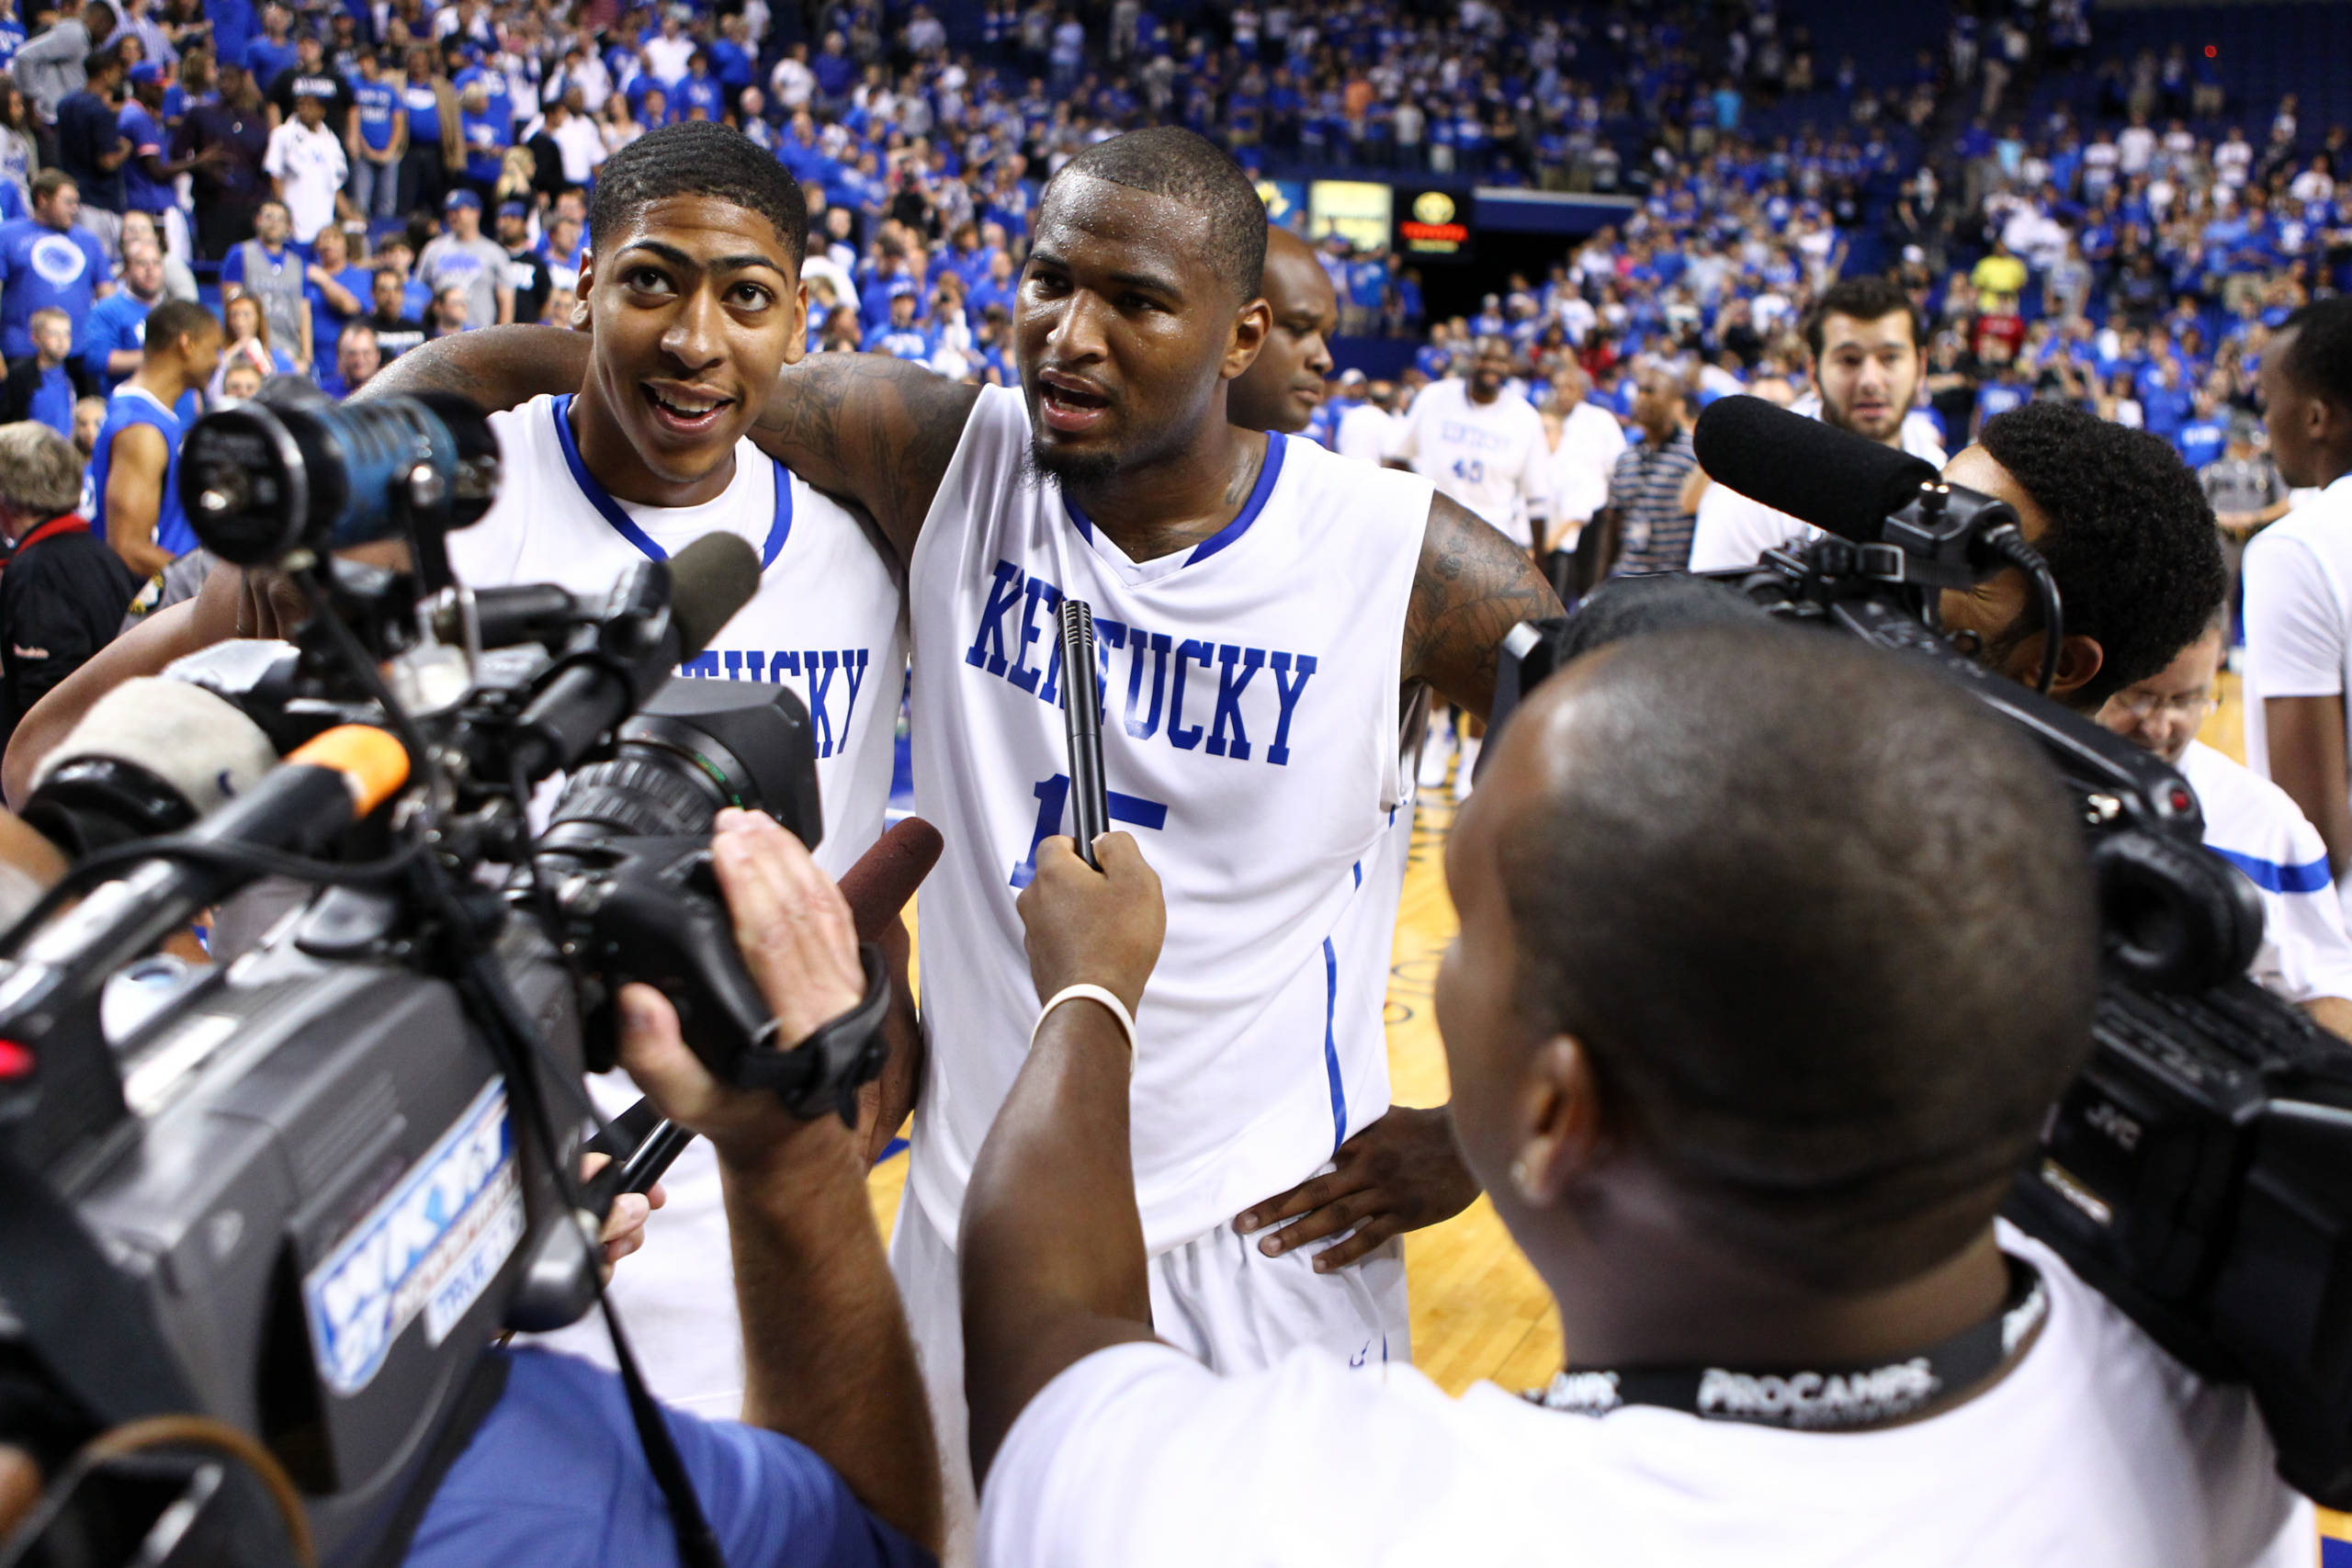 UK Alumni Charity Game Sold Out, on ESPNU